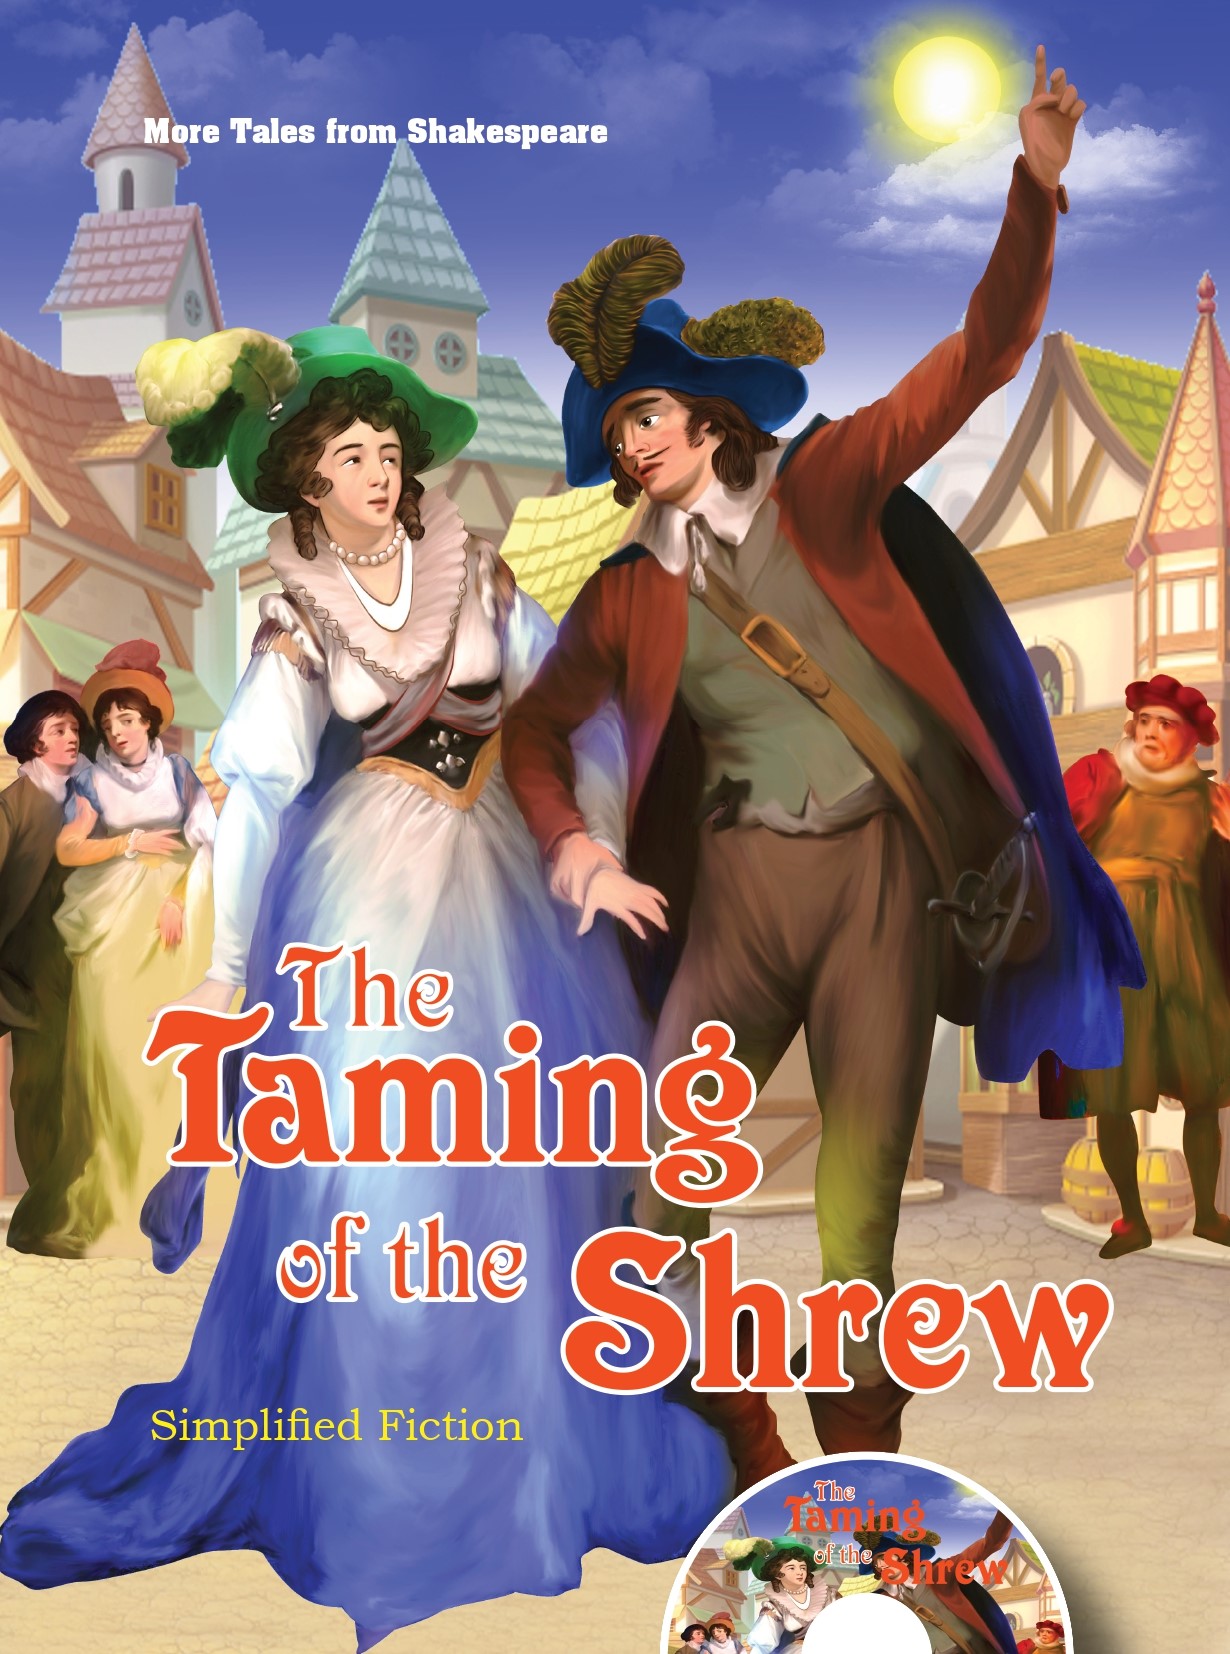 More Tales from Shakespeare - The Taming of the Shrew - Simplified Fiction 